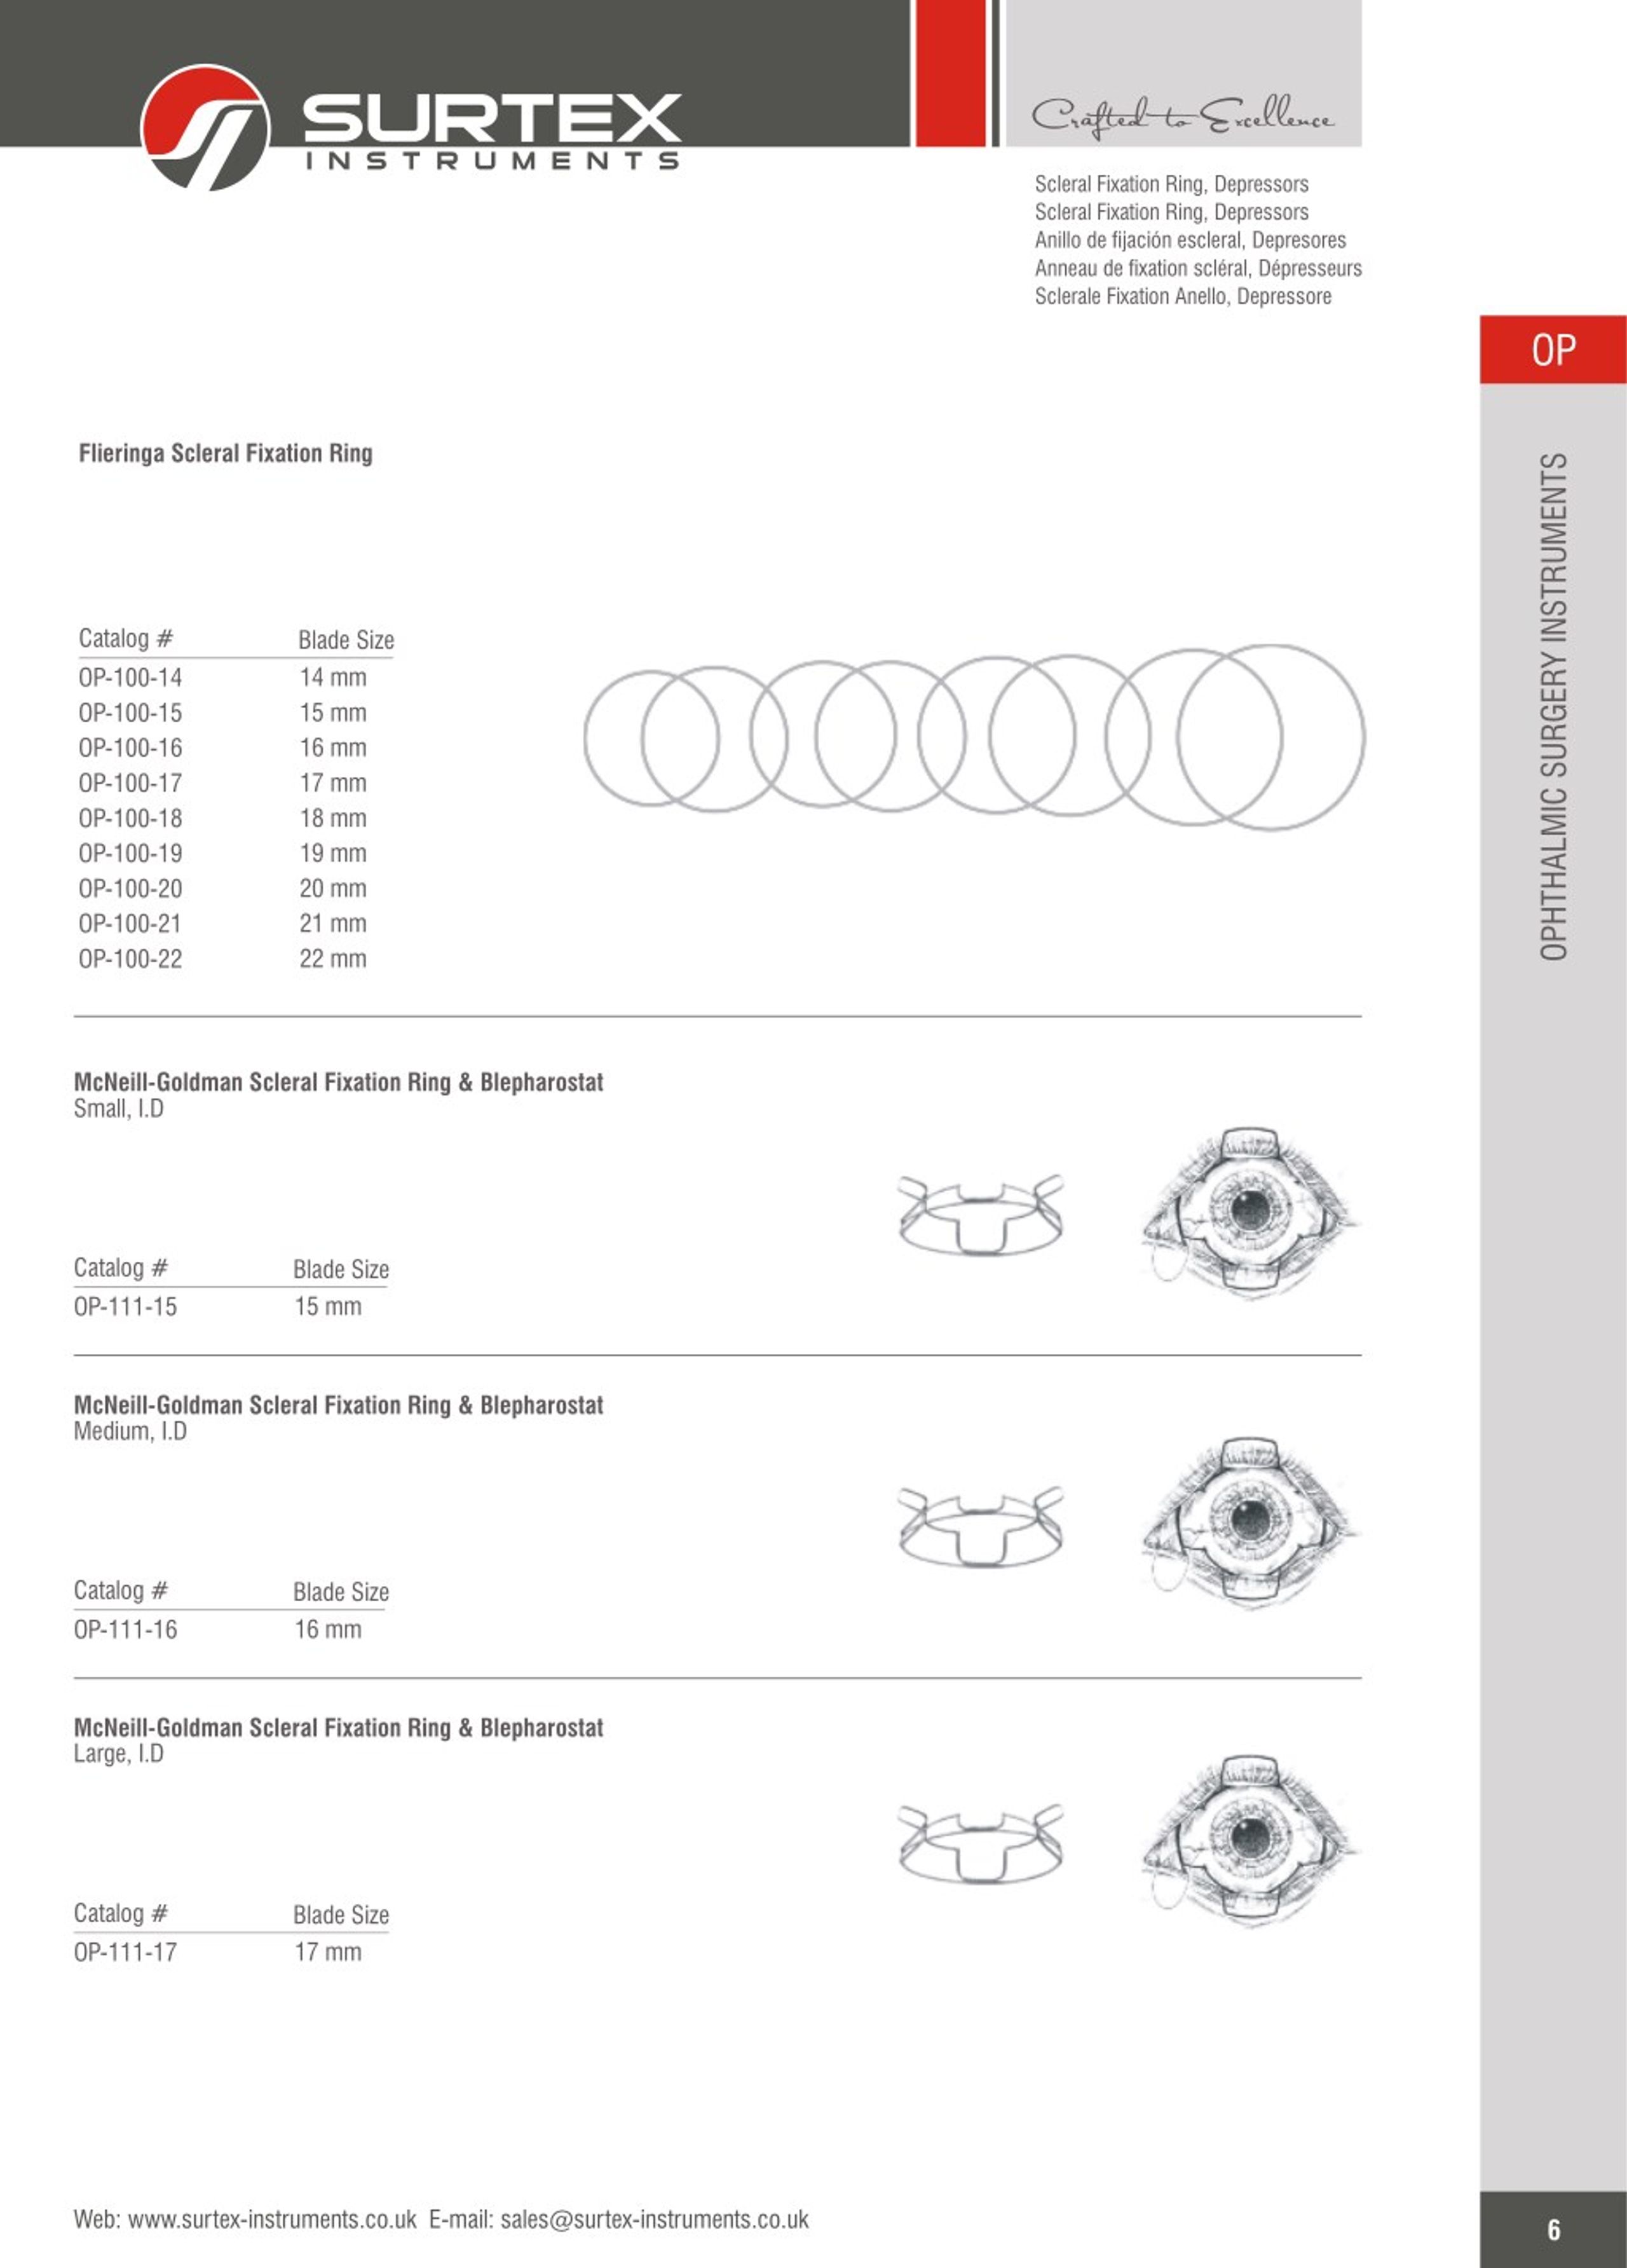 Flieringa Scleral Fixation Rings - 19mm - BOSS Surgical Instruments